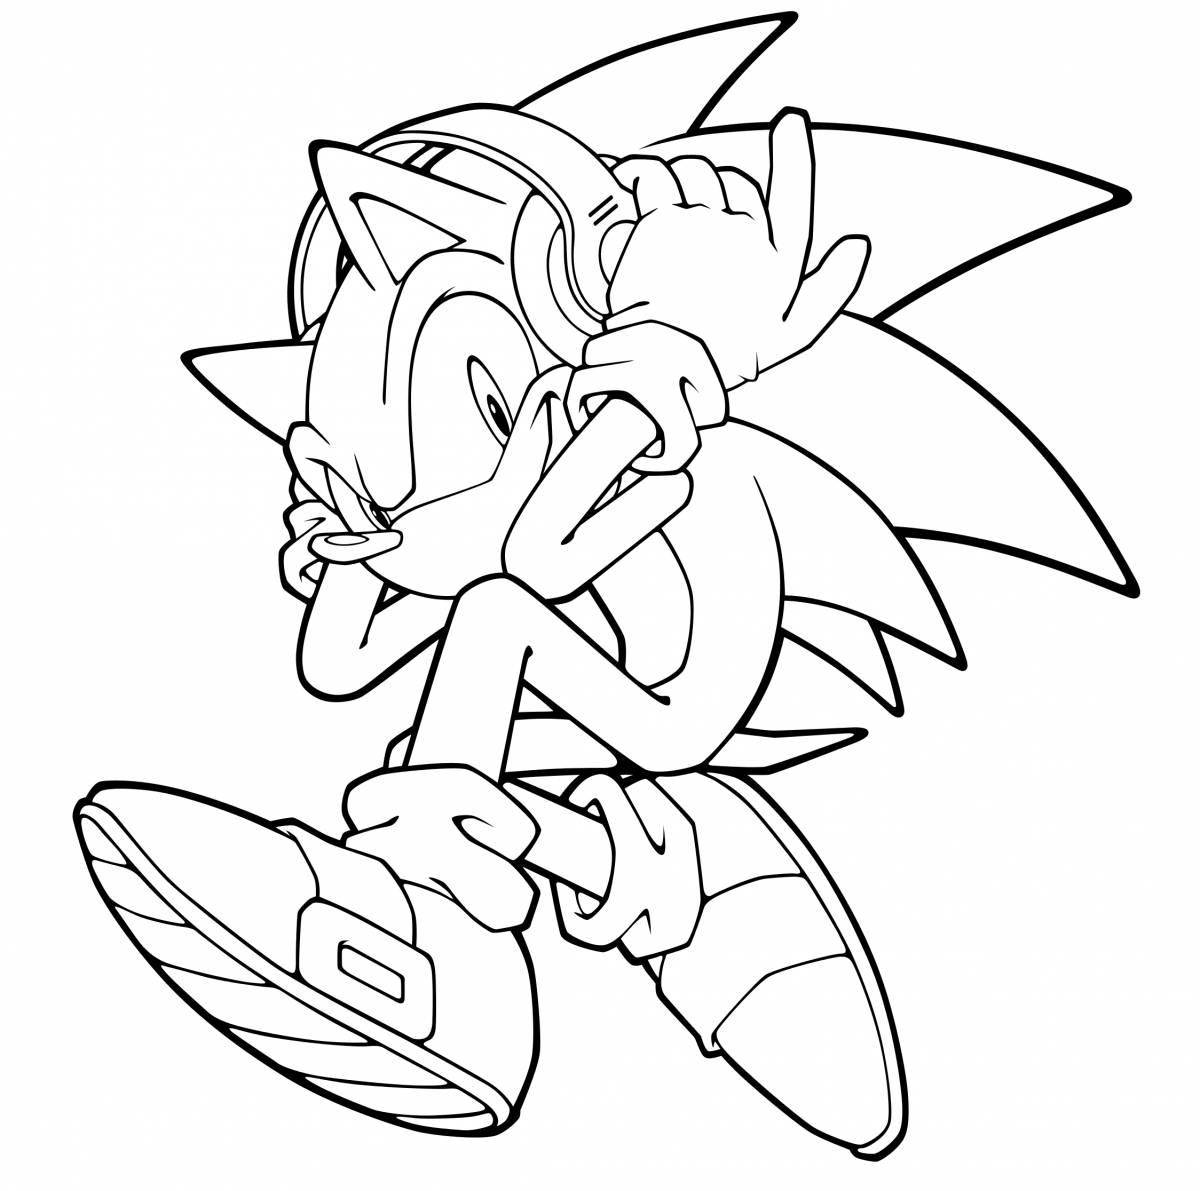 Playful sonic coloring by numbers